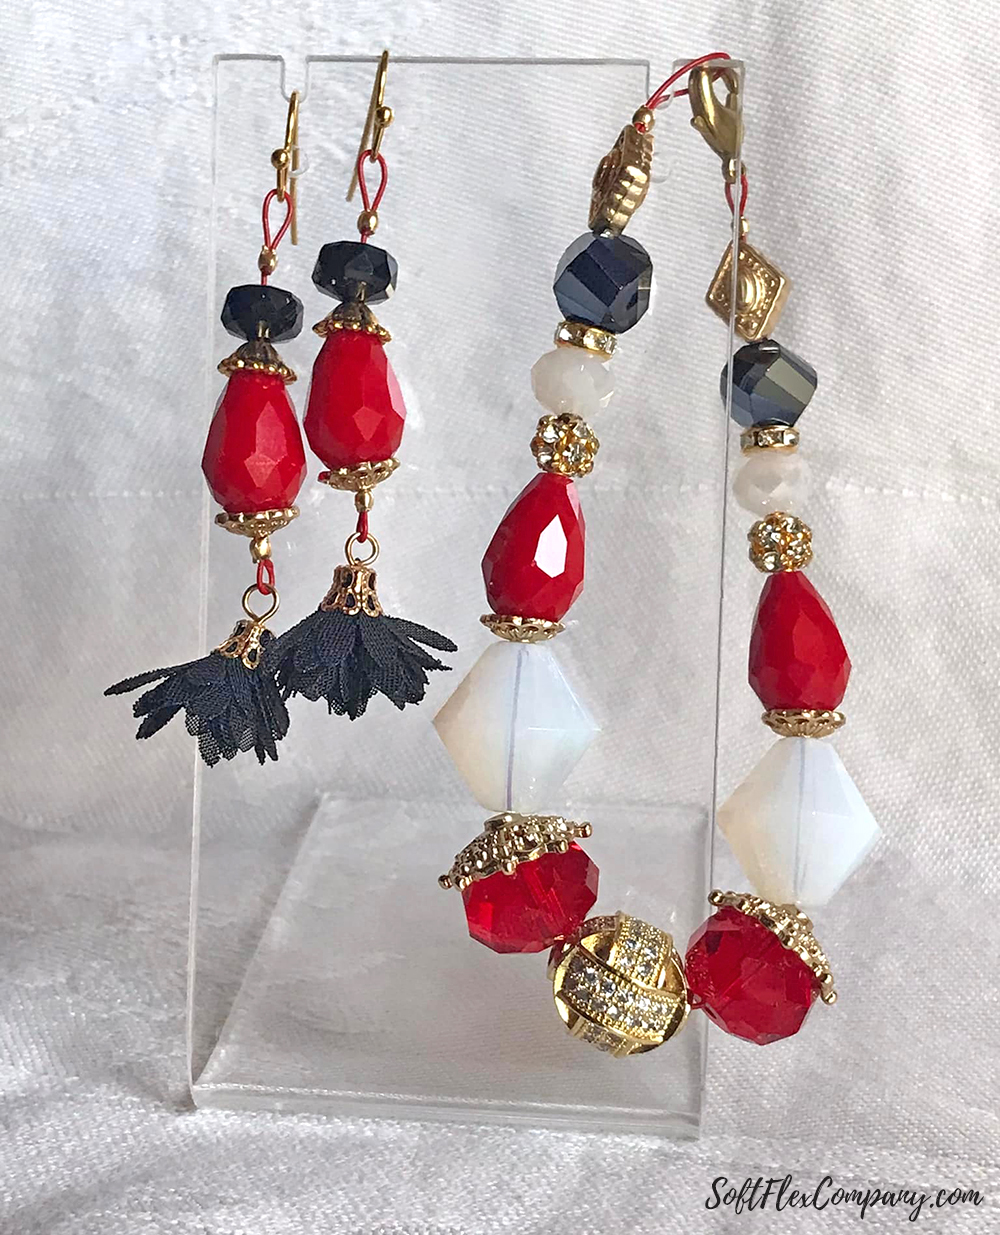 Parisian Couture Jewelry by Asaria Speicher